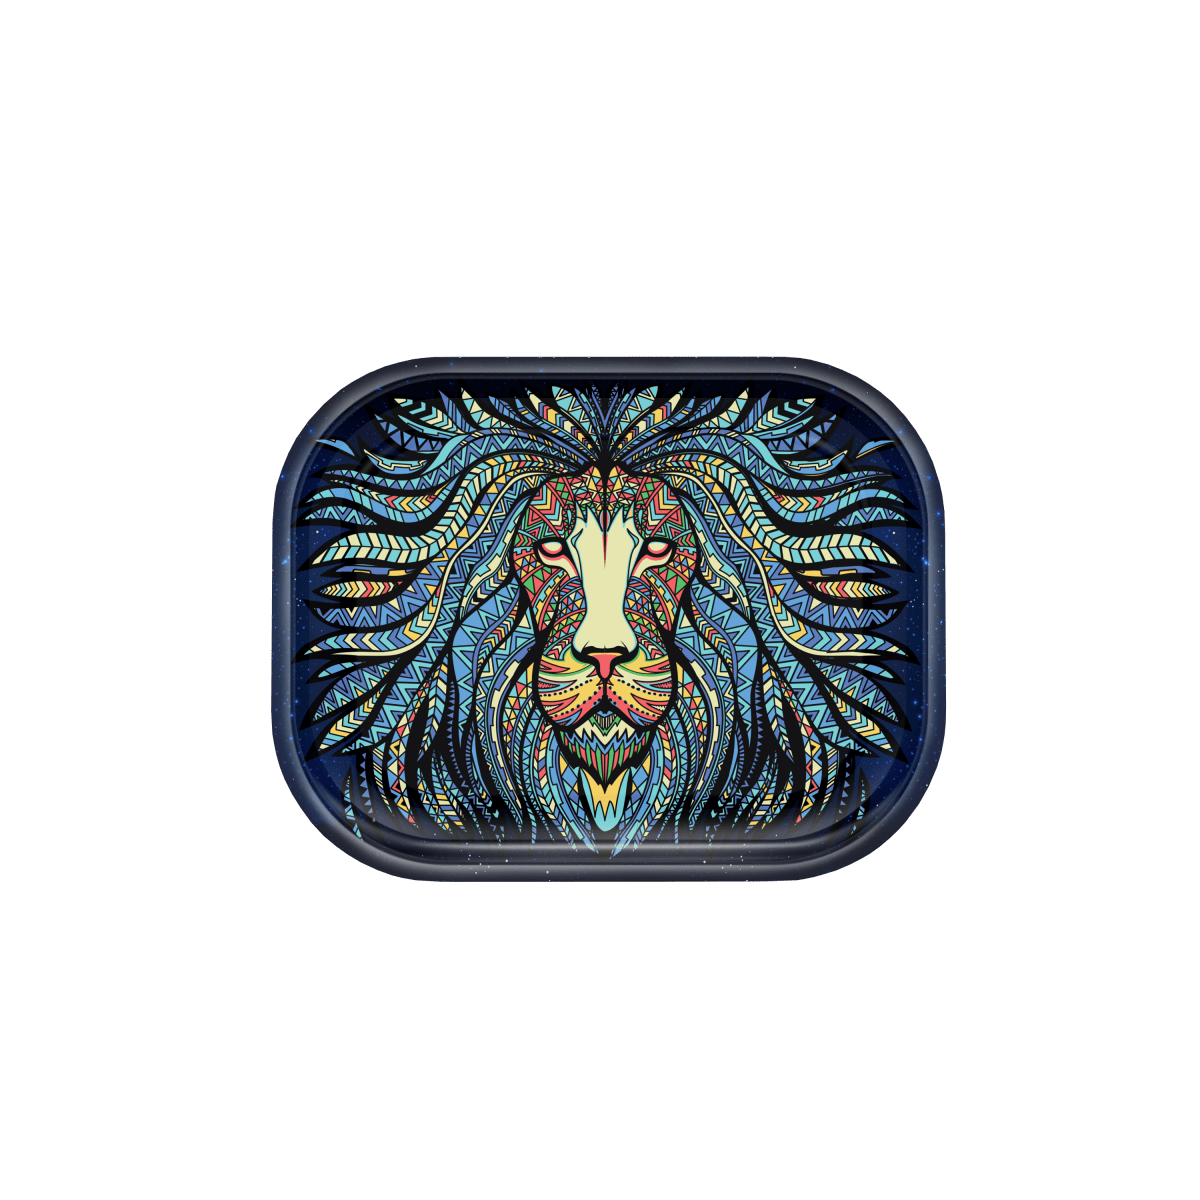 V-Syndicate Glass Small / Tribal Lion V-Syndicate Metal Rolling Trays